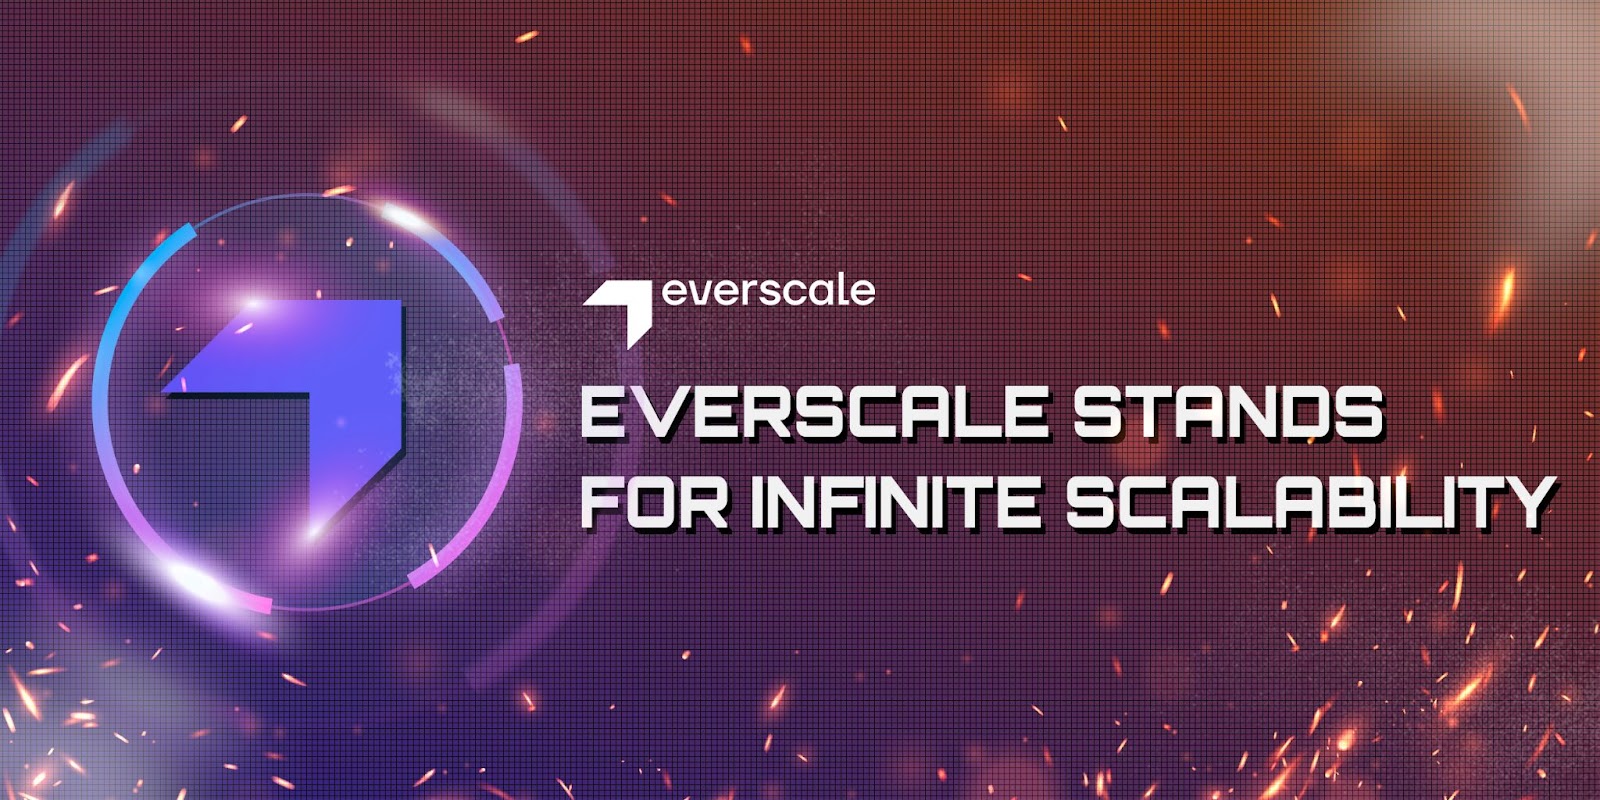 Everscale, Sunday, December 19, 2021, Press release picture